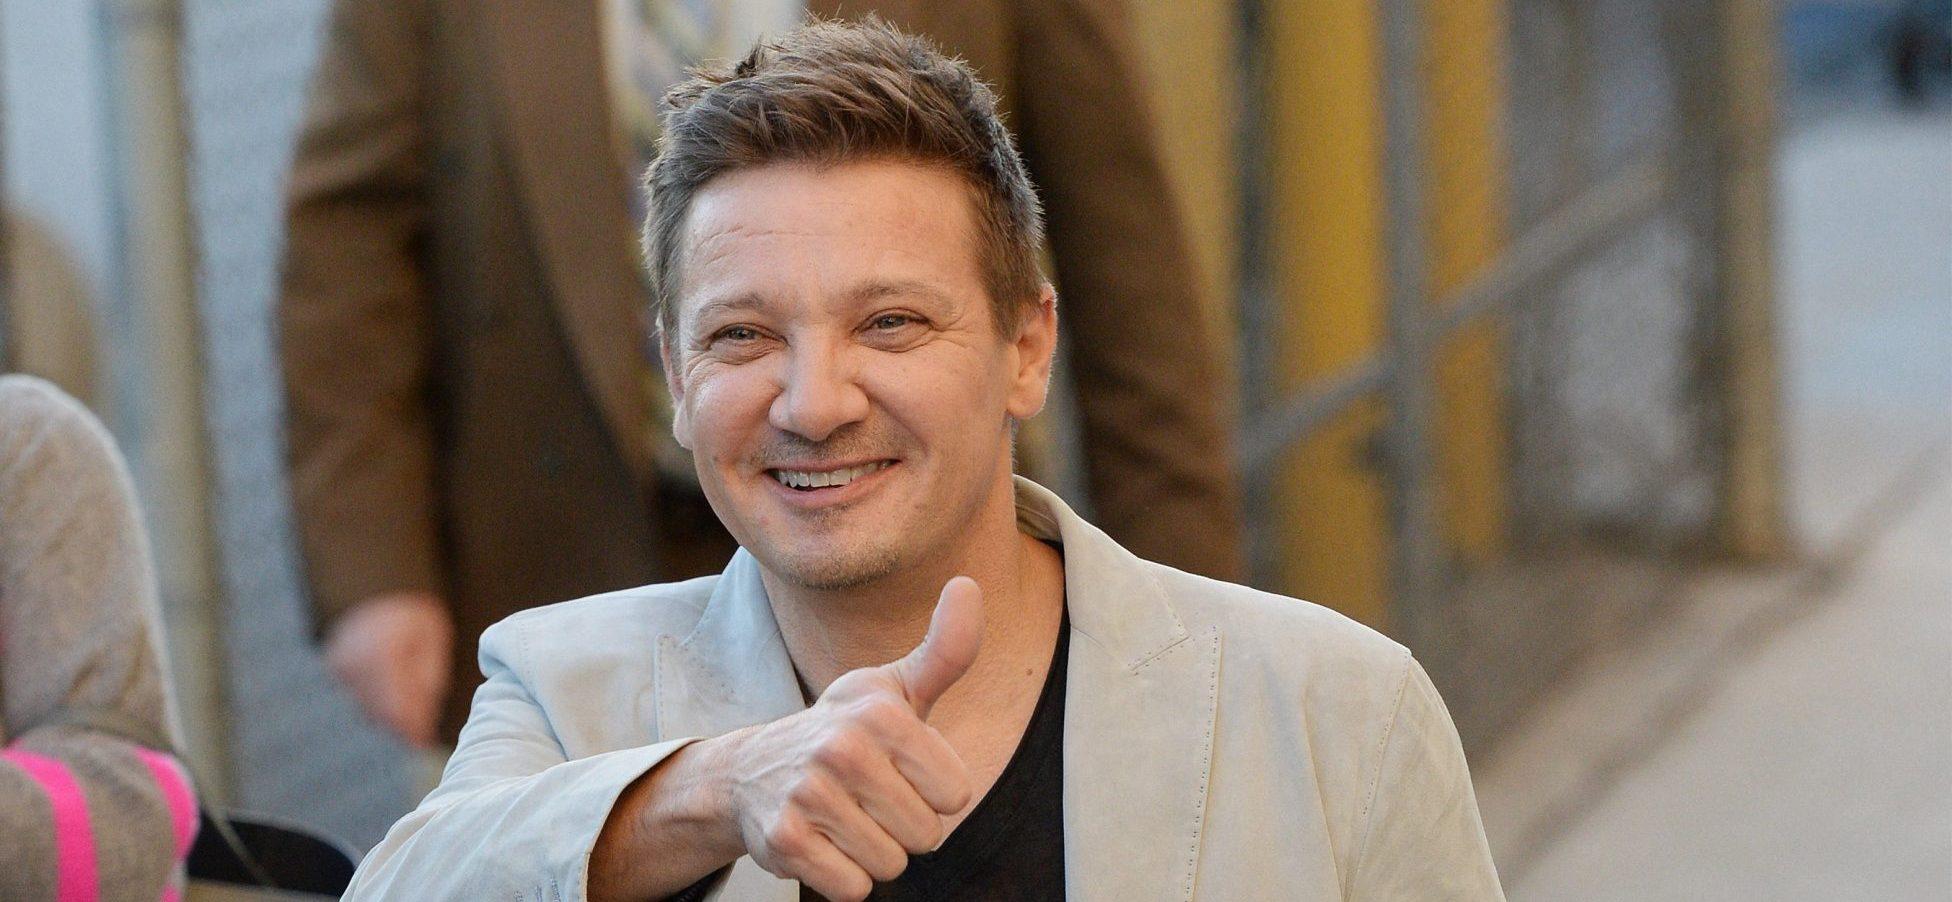 Jeremy Renner Returns Home To Accident Site 5 Months Later